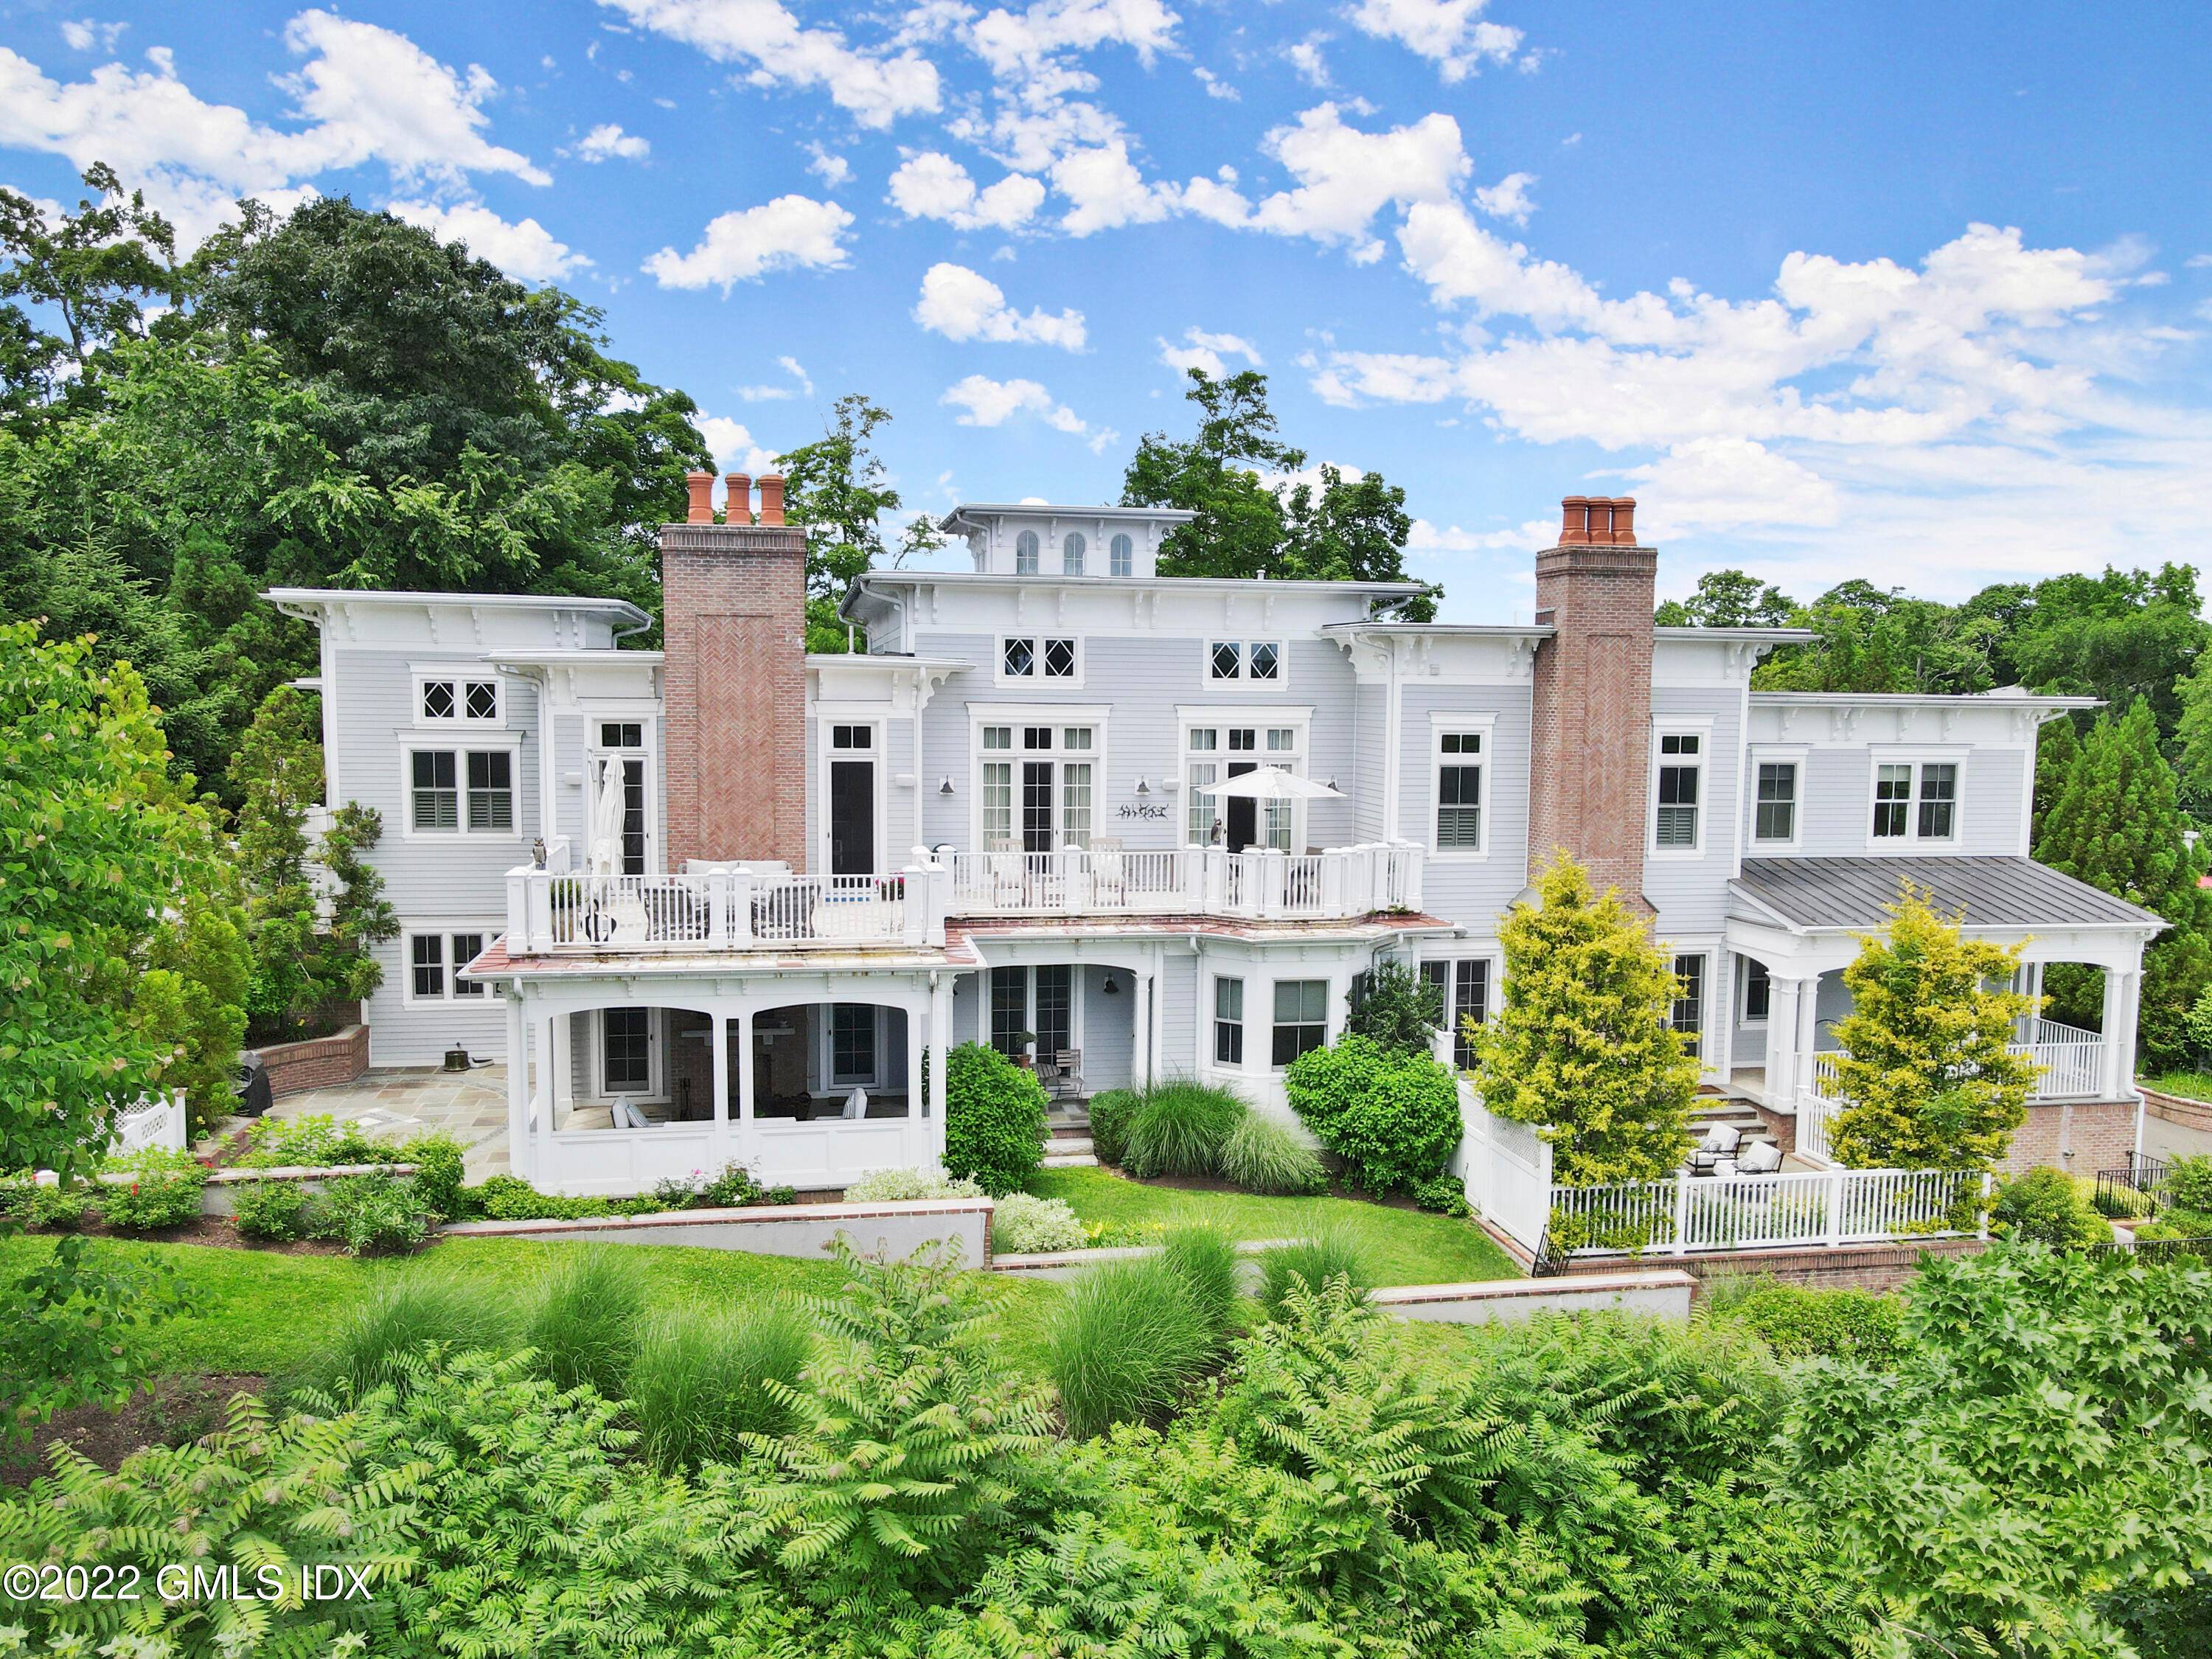 Hidden Jewel in Cos Cob. This luxurious one level penthouse has 12 foot ceilings, open floor plan, fireplace and views of the Mianus River.